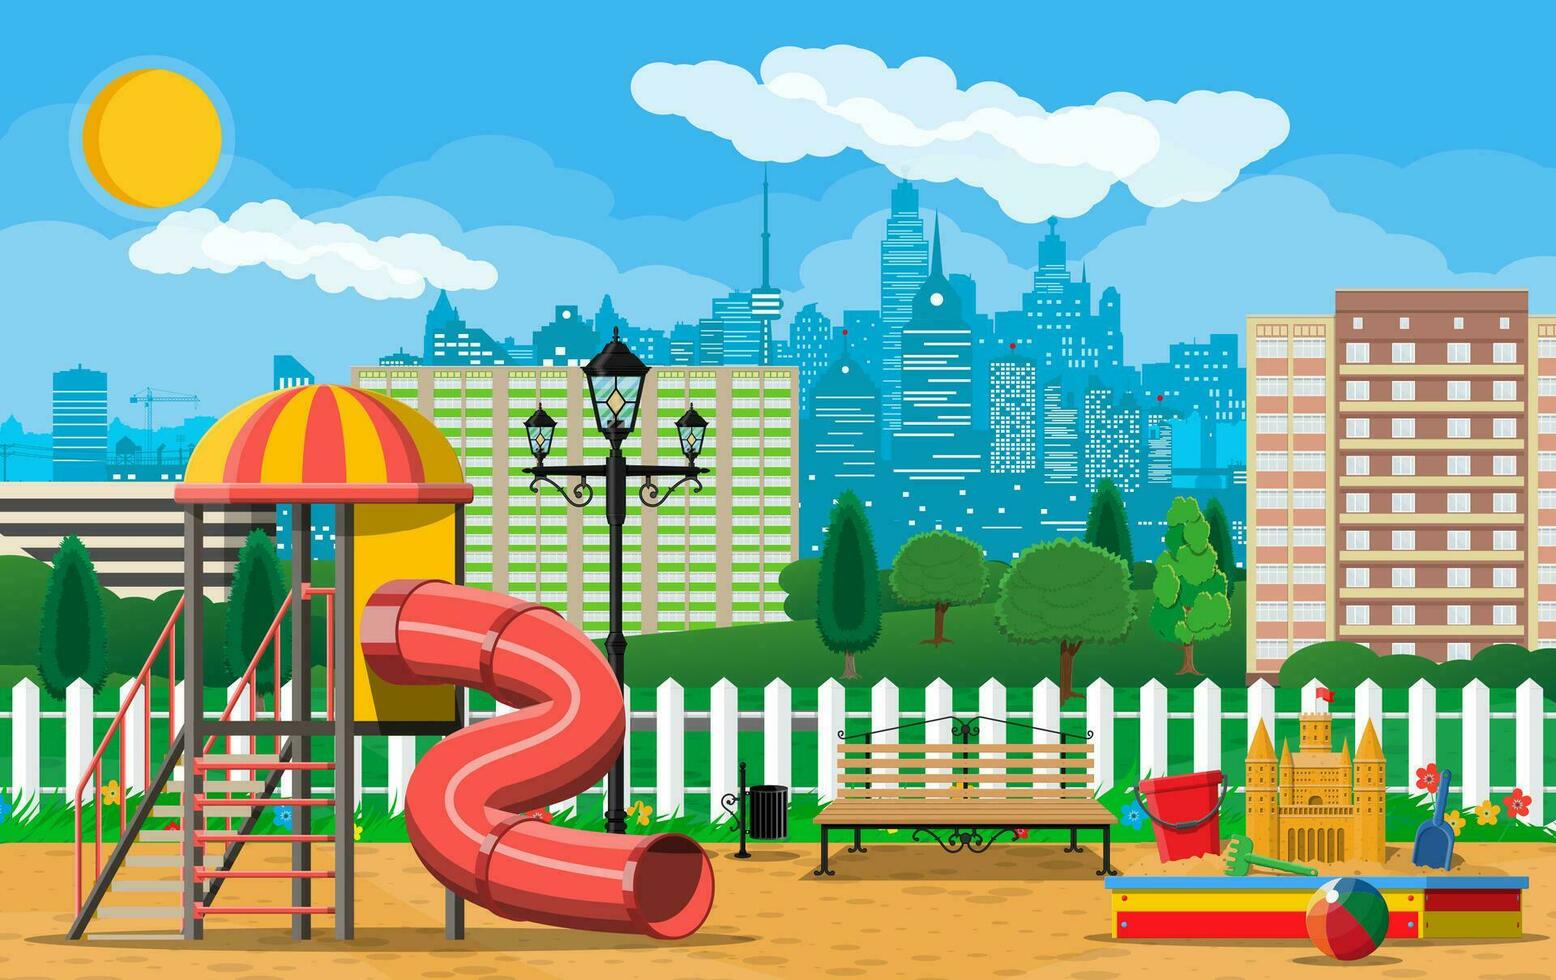 Kids playground kindergarten panorama. Urban child amusement. Slide ladder, sandbox with toys. Bench and lamp. City park with attractions. Cityscape, clouds and sun. Vector illustration flat style